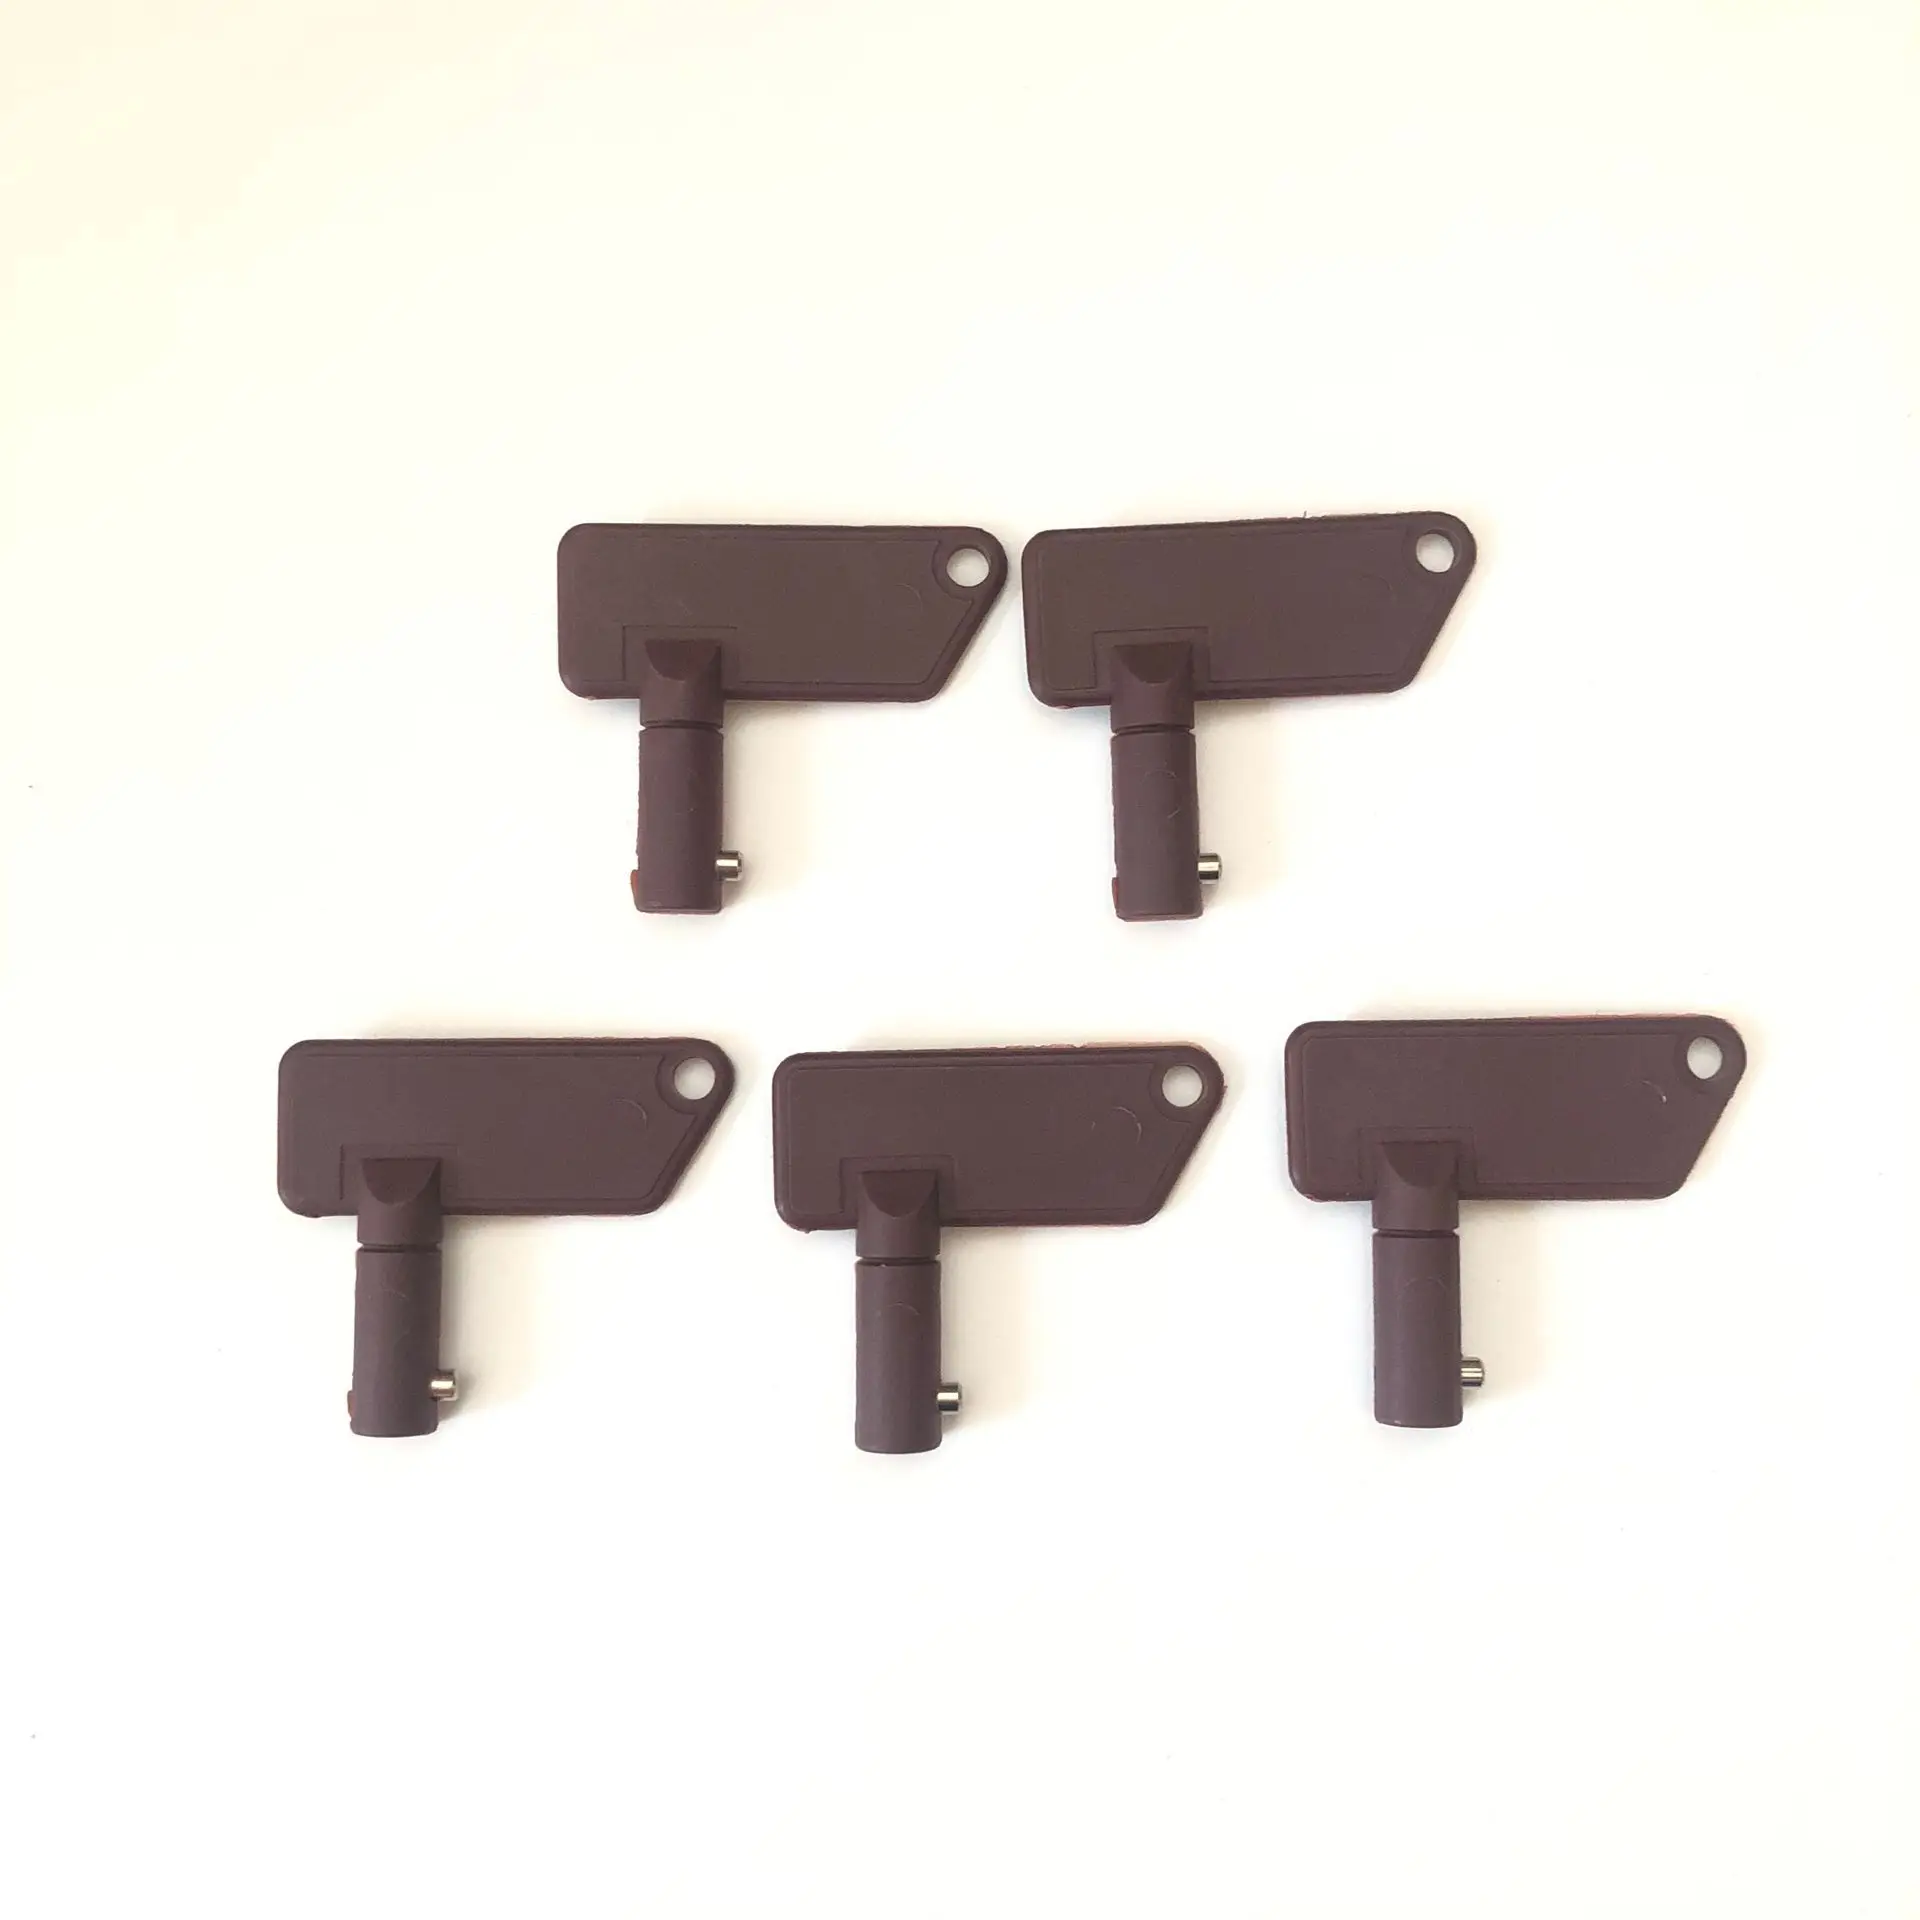 

5PCS MS634212 Ignition Key For Volvo Terex Battery and Master Disconnect